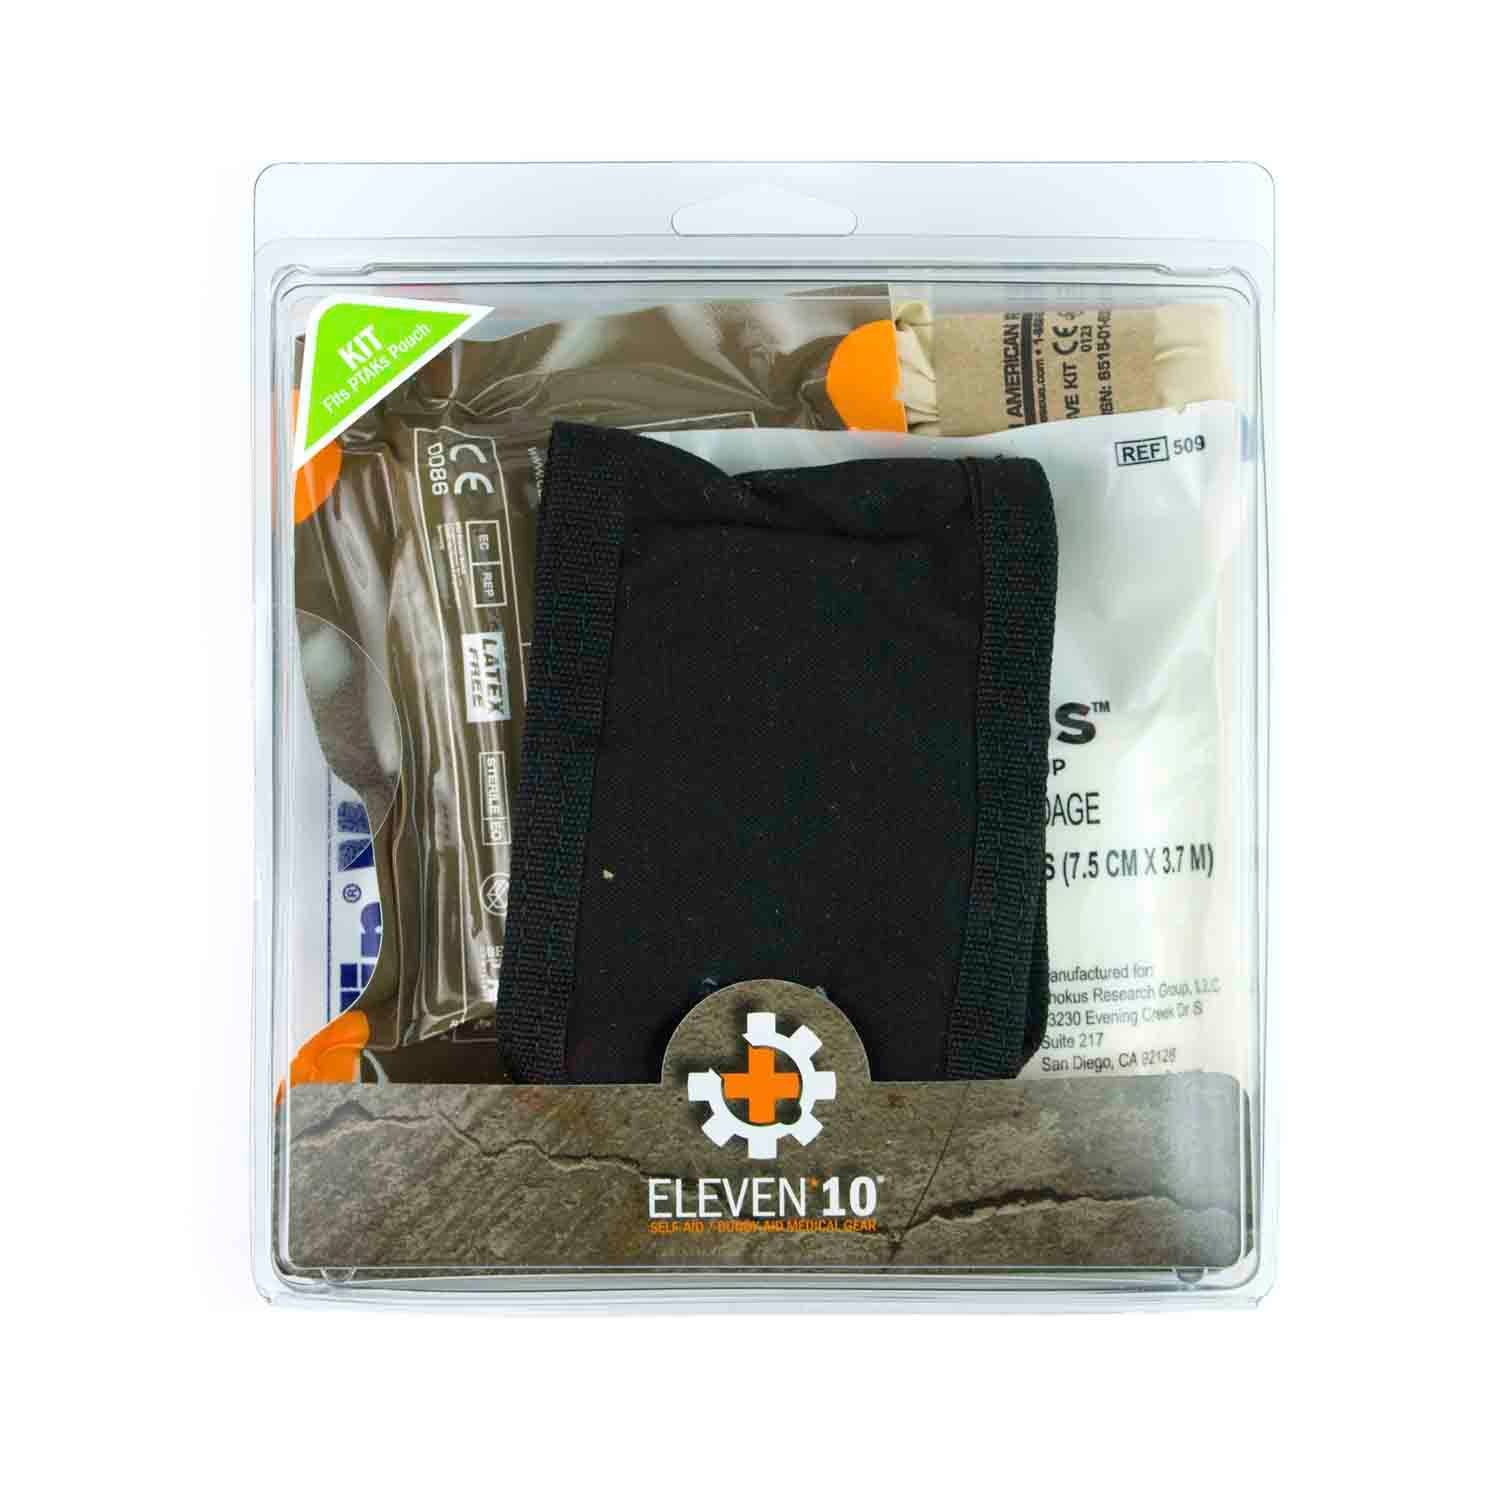 Eleven 10 PTAKS Replacement Kit: Compress Gauze & Insert Wal